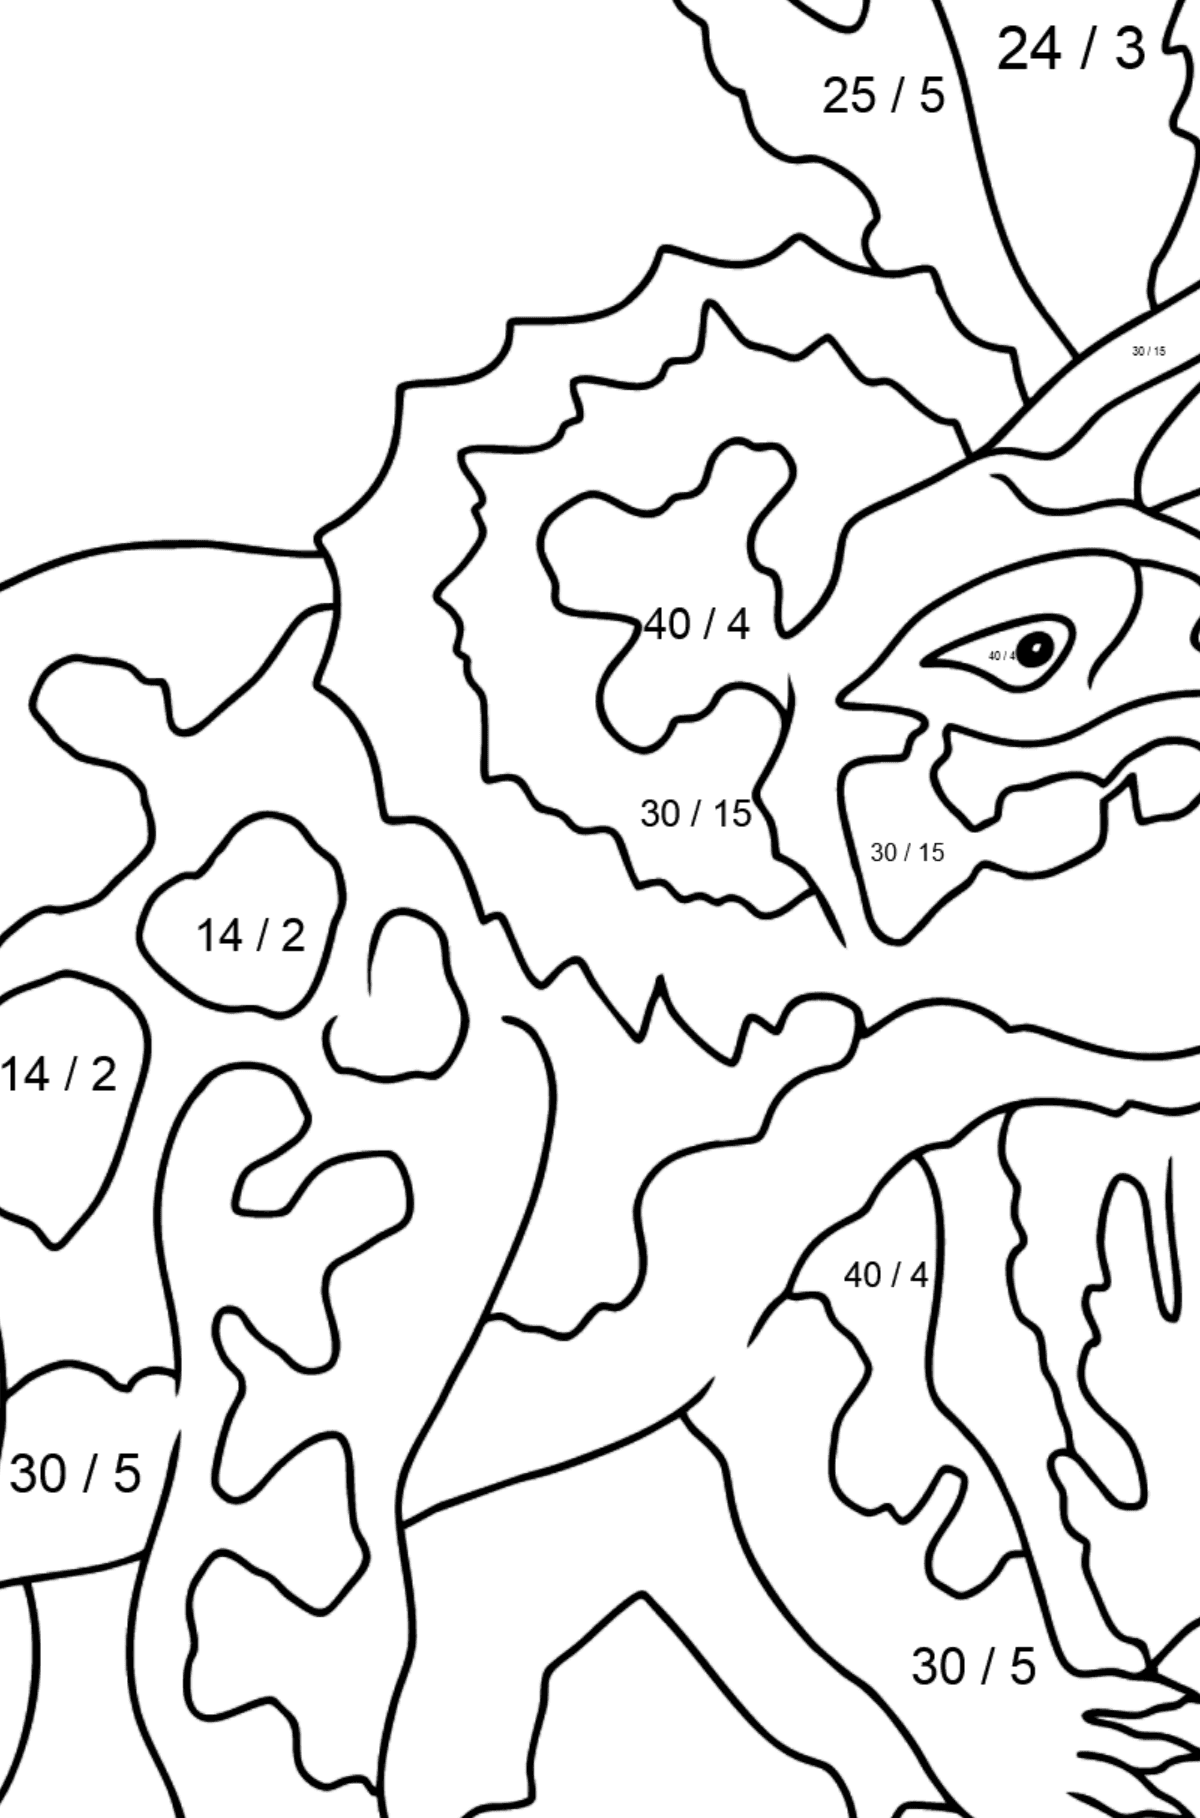 Coloring Page - Triceratops - A Peaceful Horned Dinosaur - Math Coloring - Division for Kids